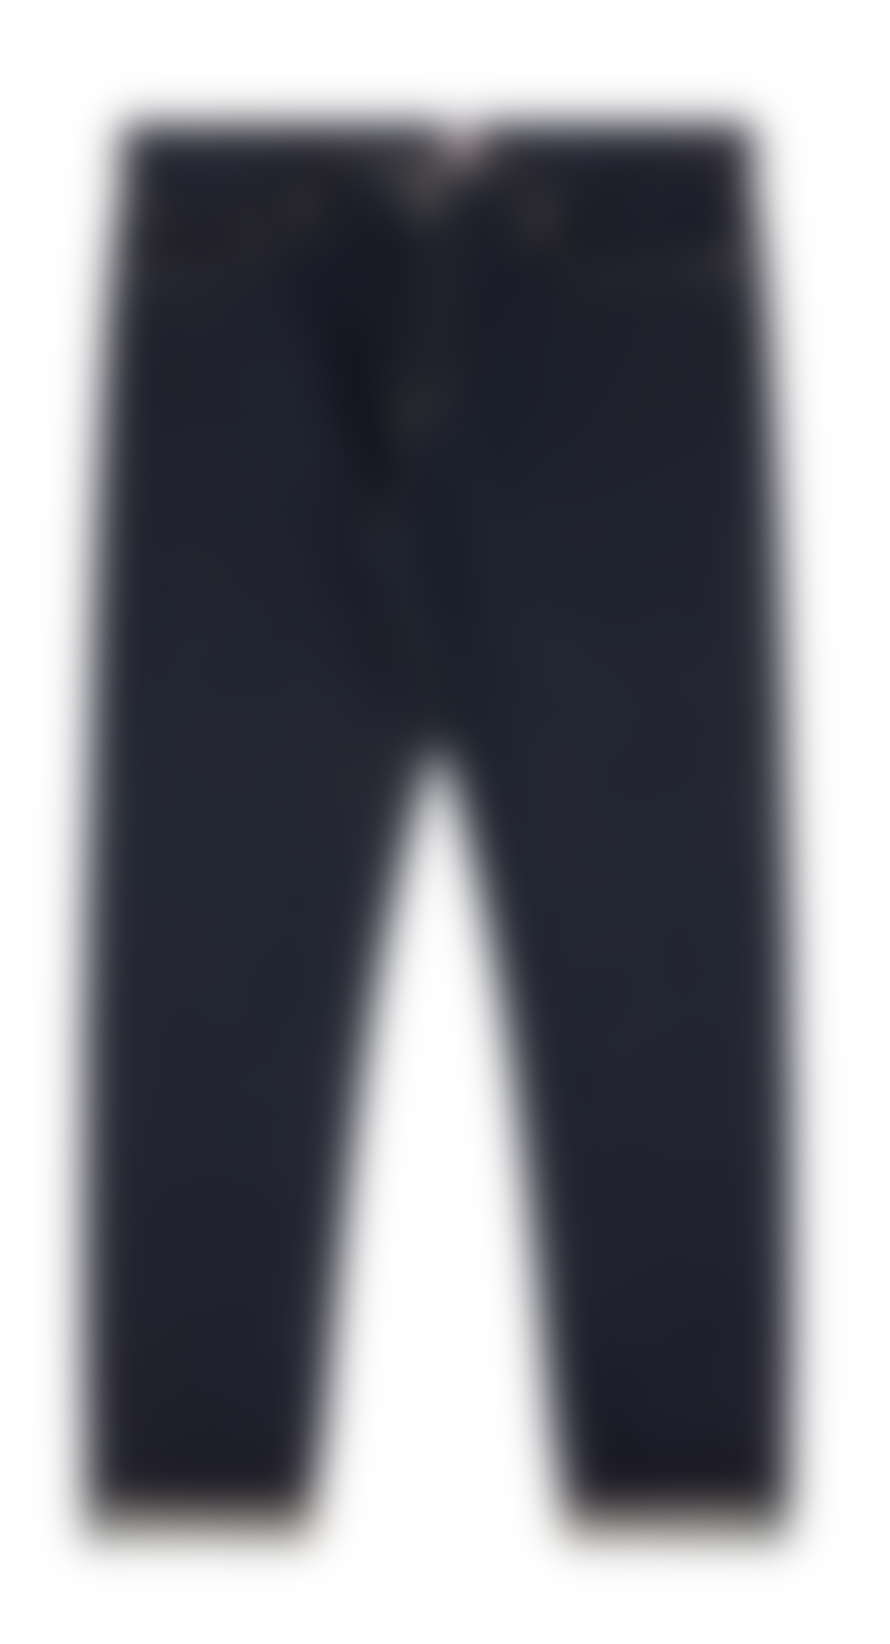 Edwin Regular Tapered Jeans Blue Rinsed